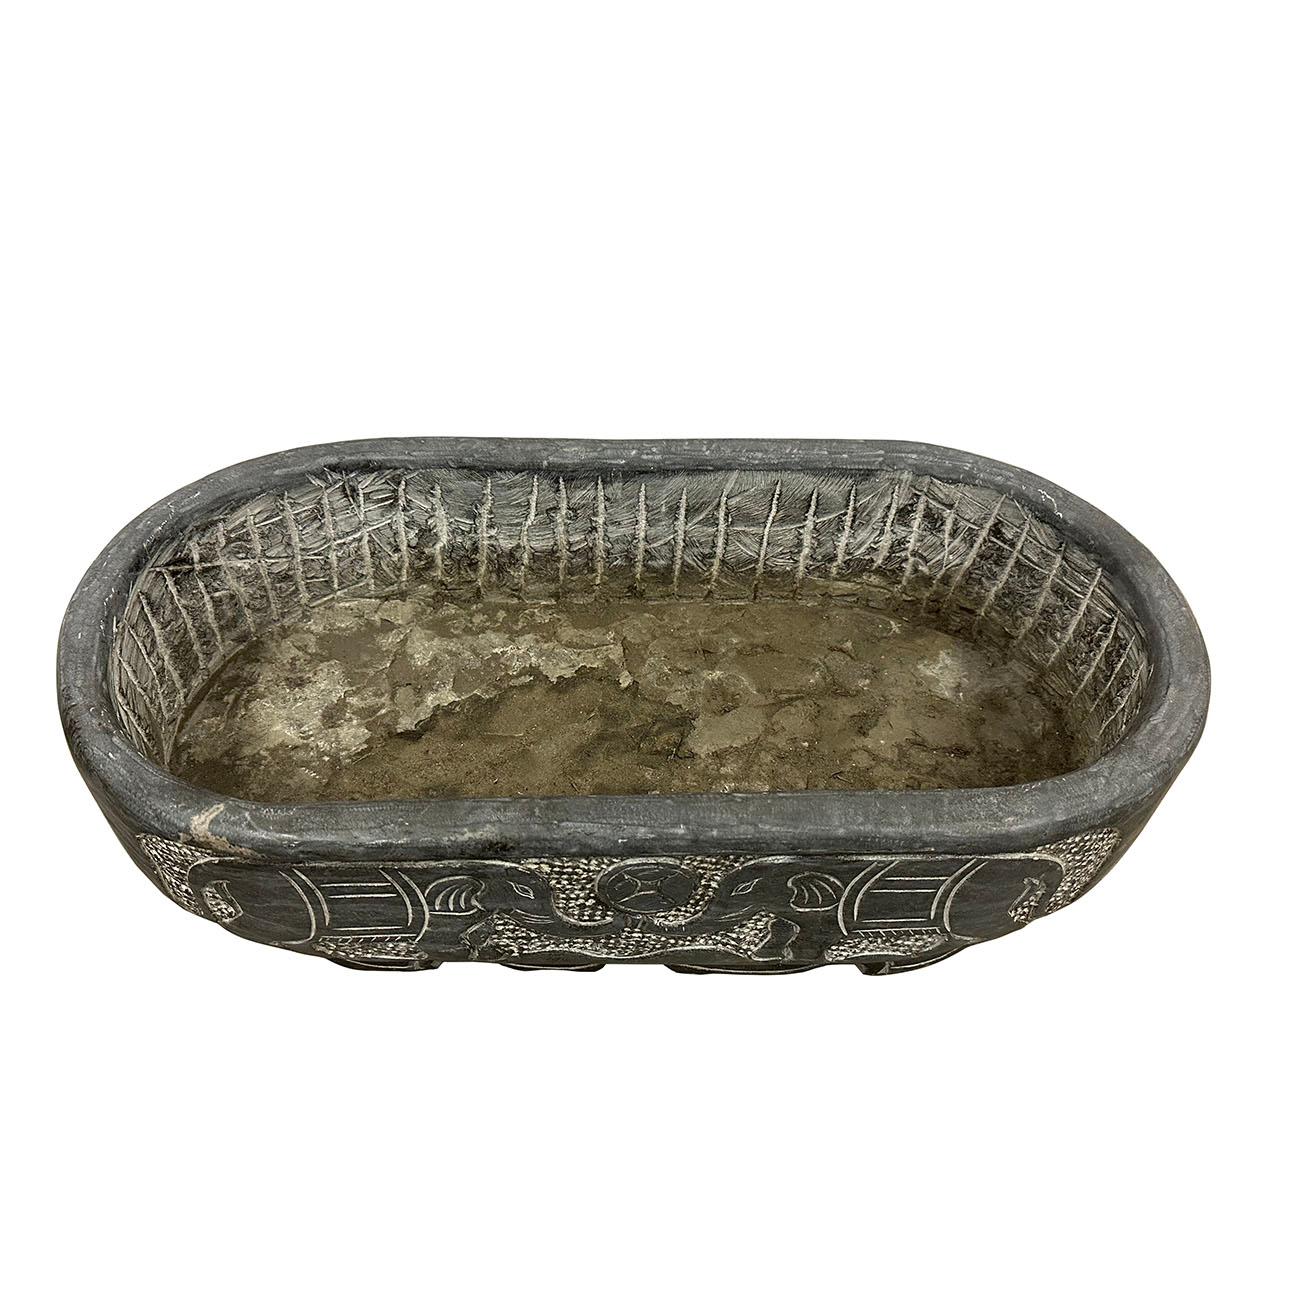 Chinese Export Vintage Chinese Hand Chiseled Stone Trough, Planter